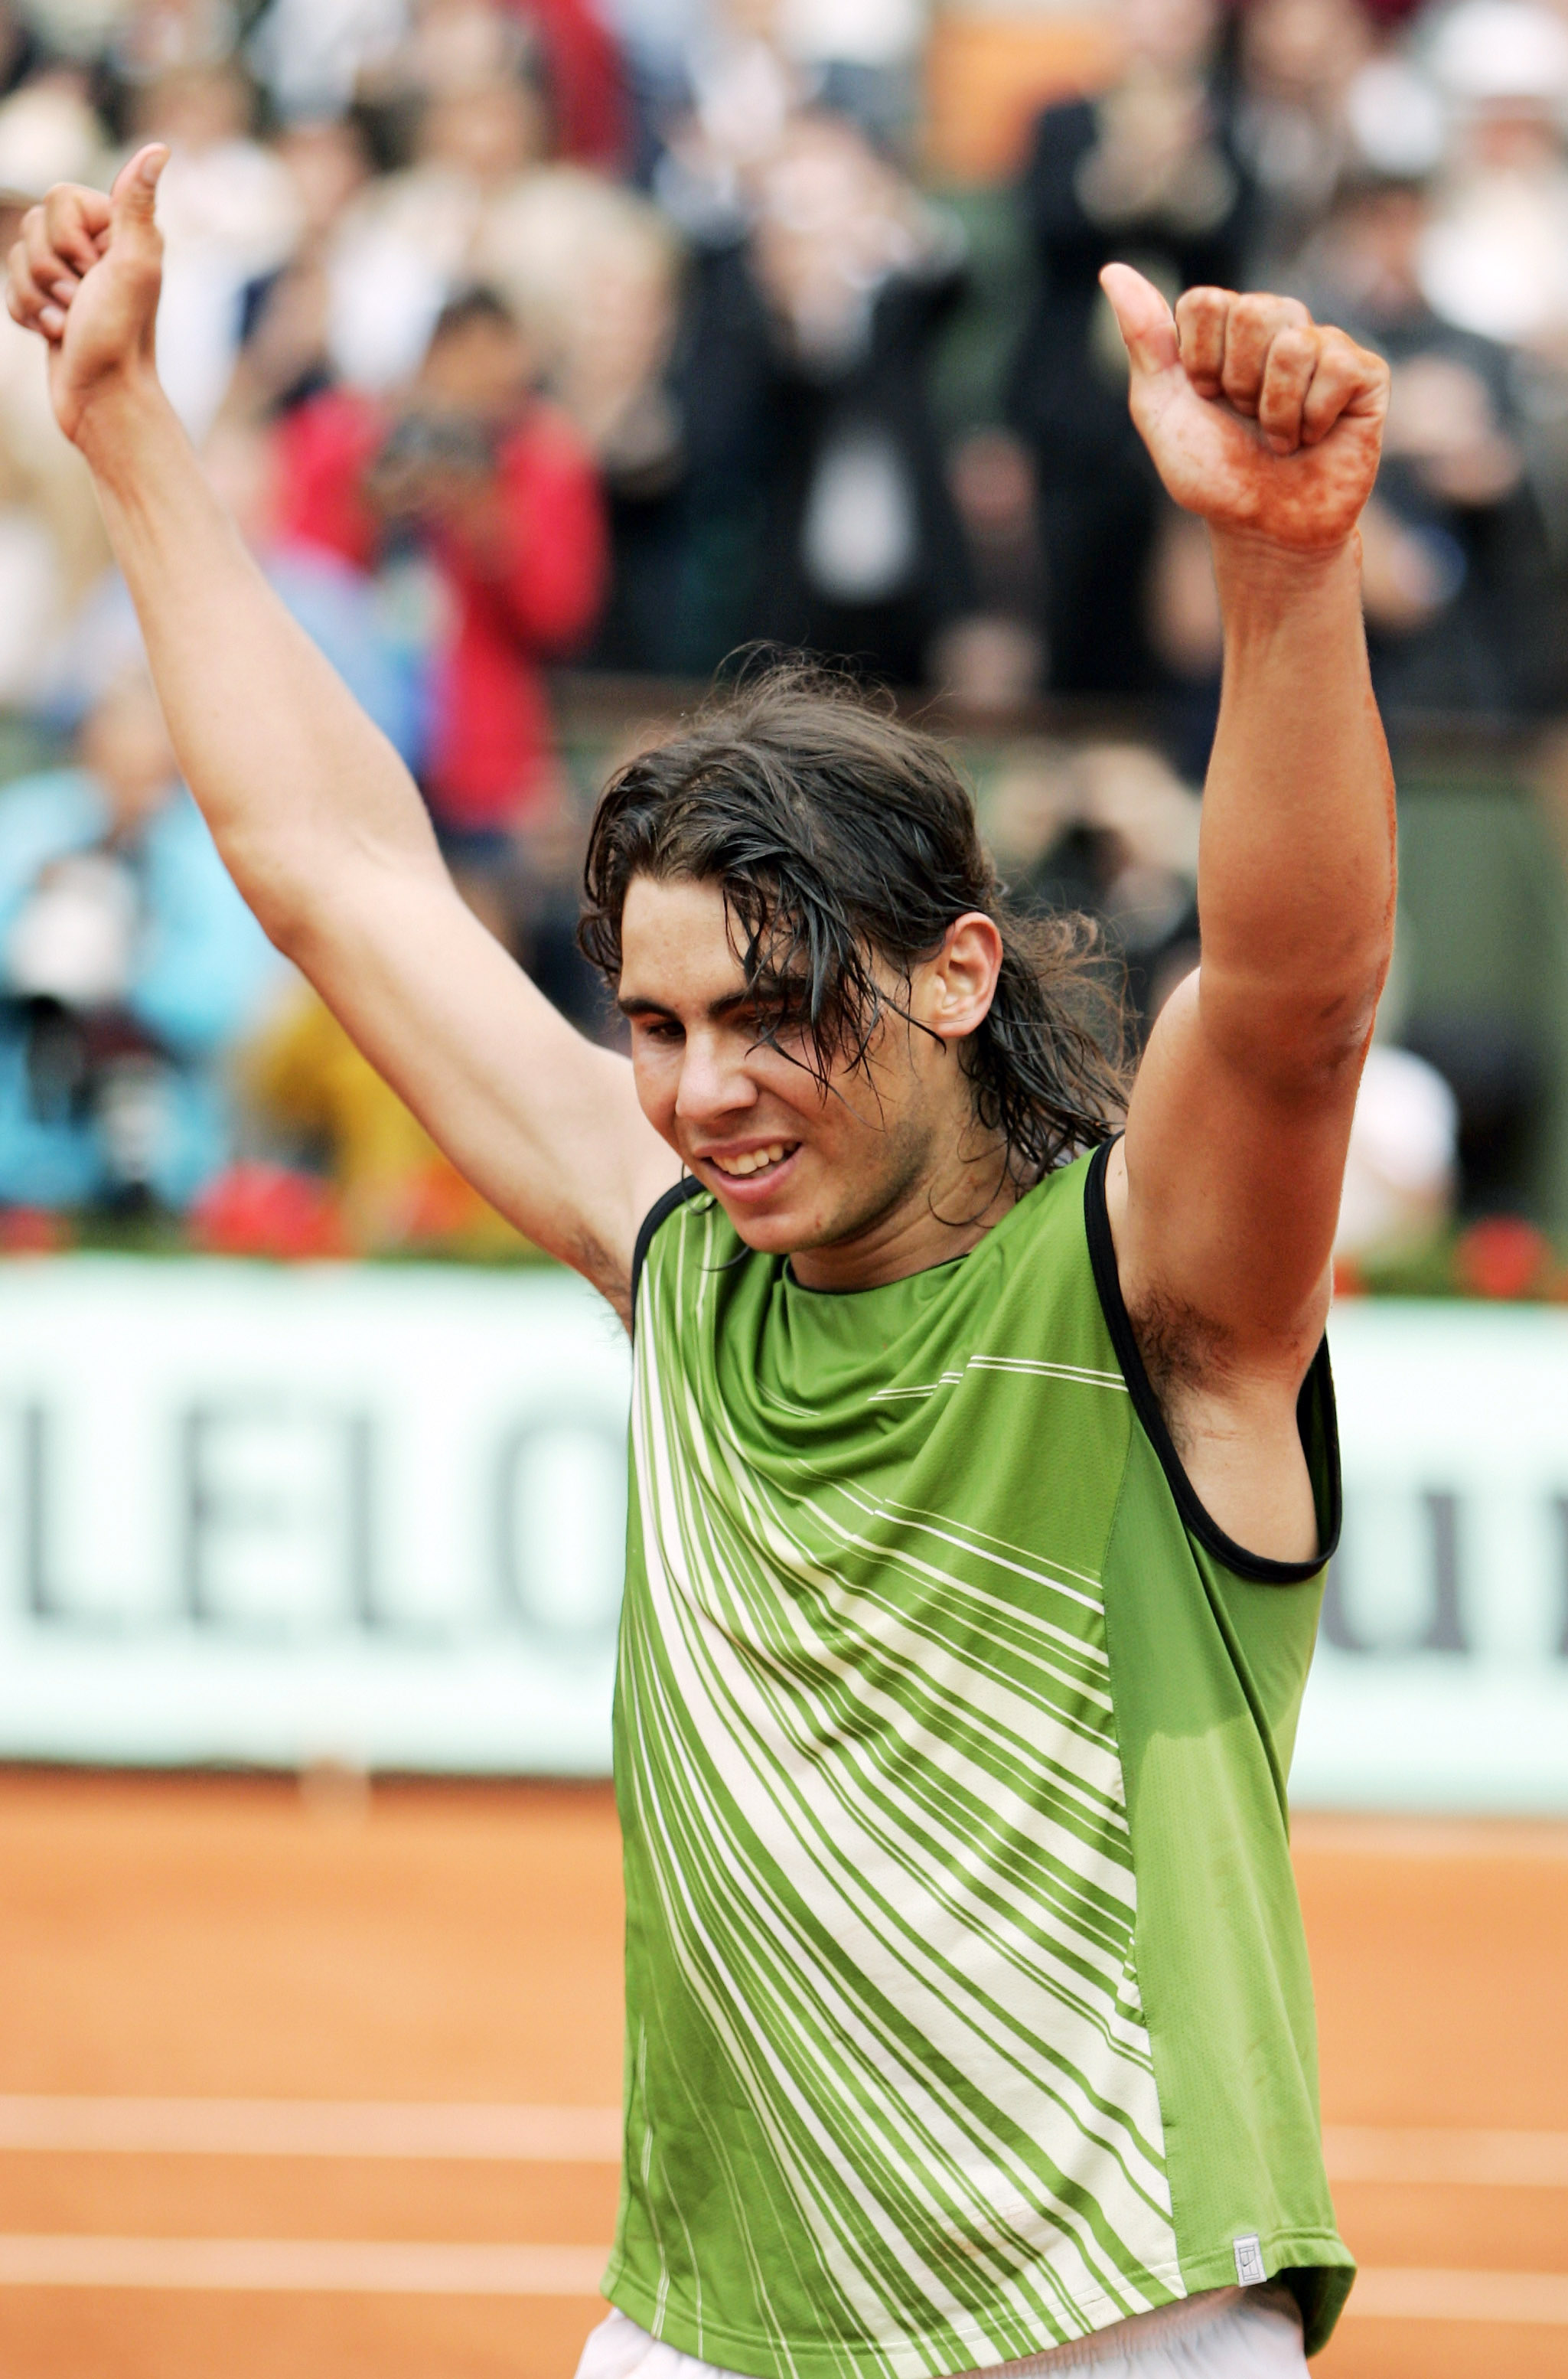 French Open Who S The More Dominating Champion Bjorn Borg Or Rafael Nadal Bleacher Report Latest News Videos And Highlights